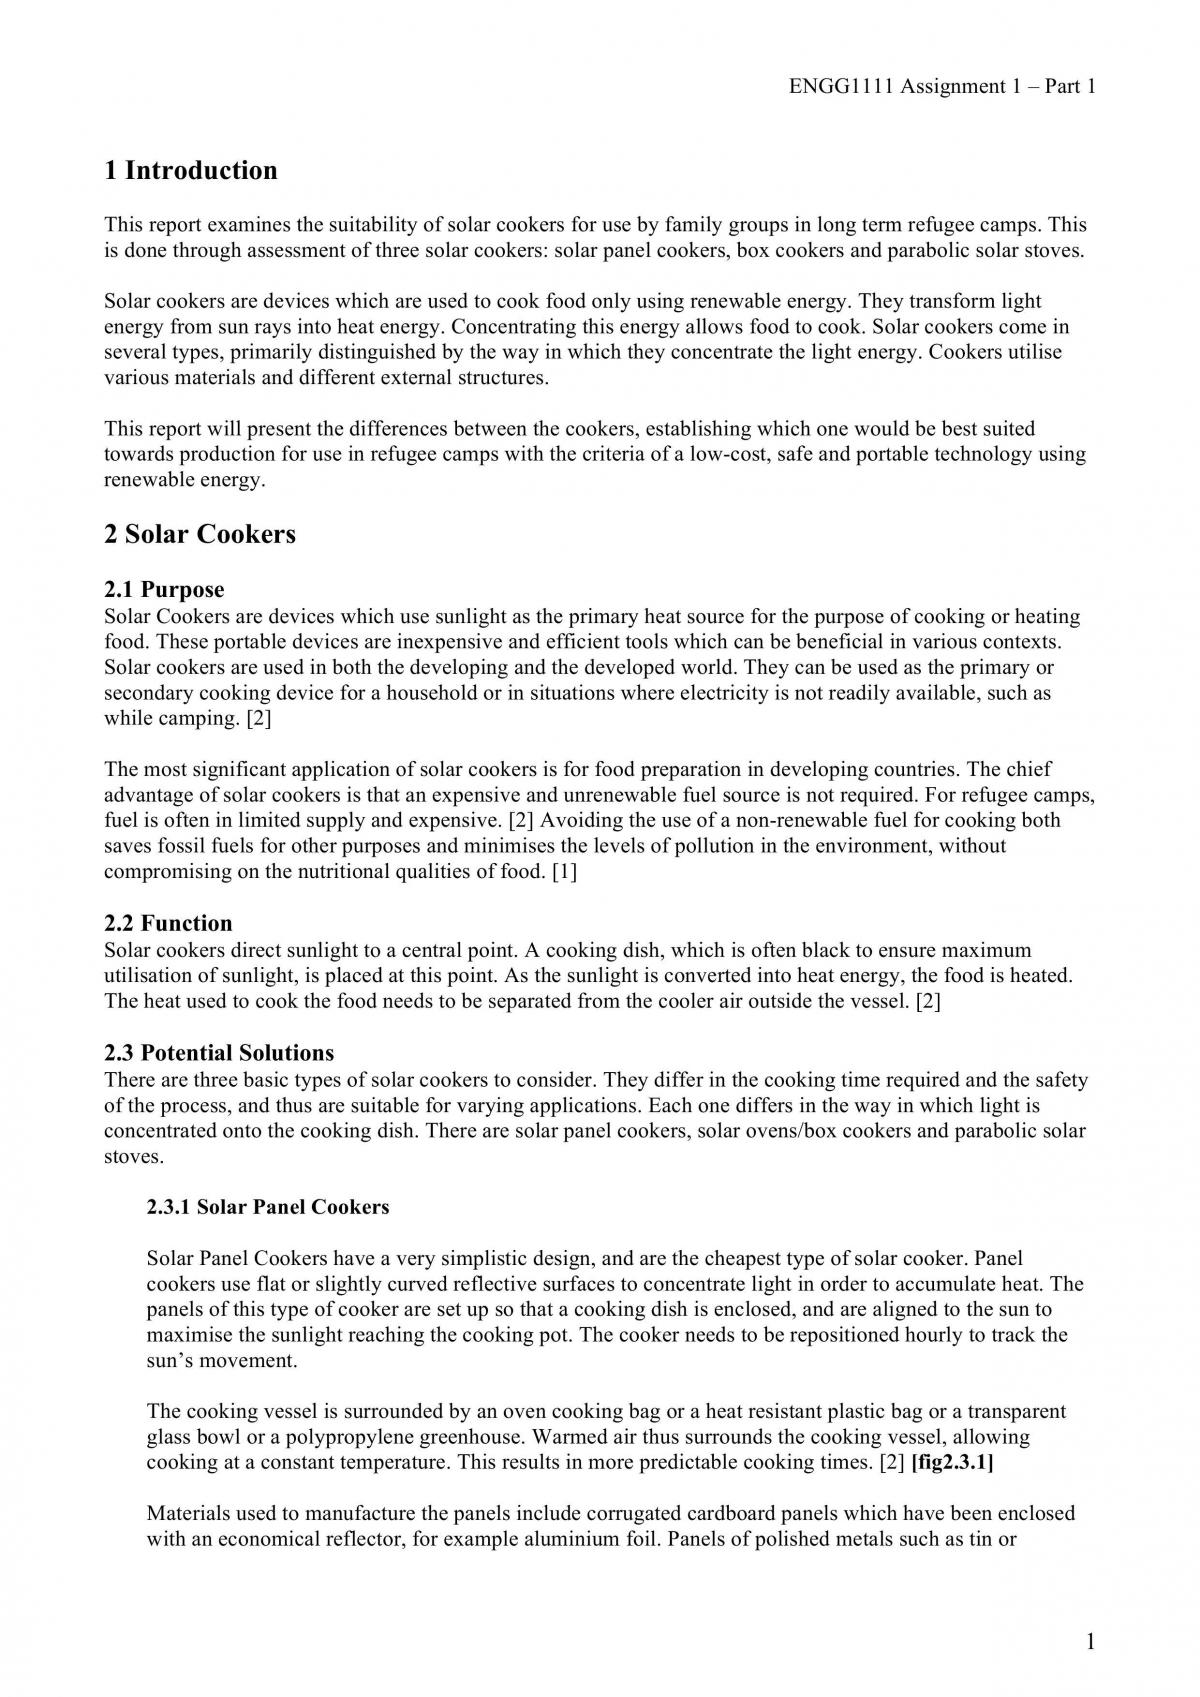 Assignment 1 - Solar Cookers Individual Research Report - Page 4